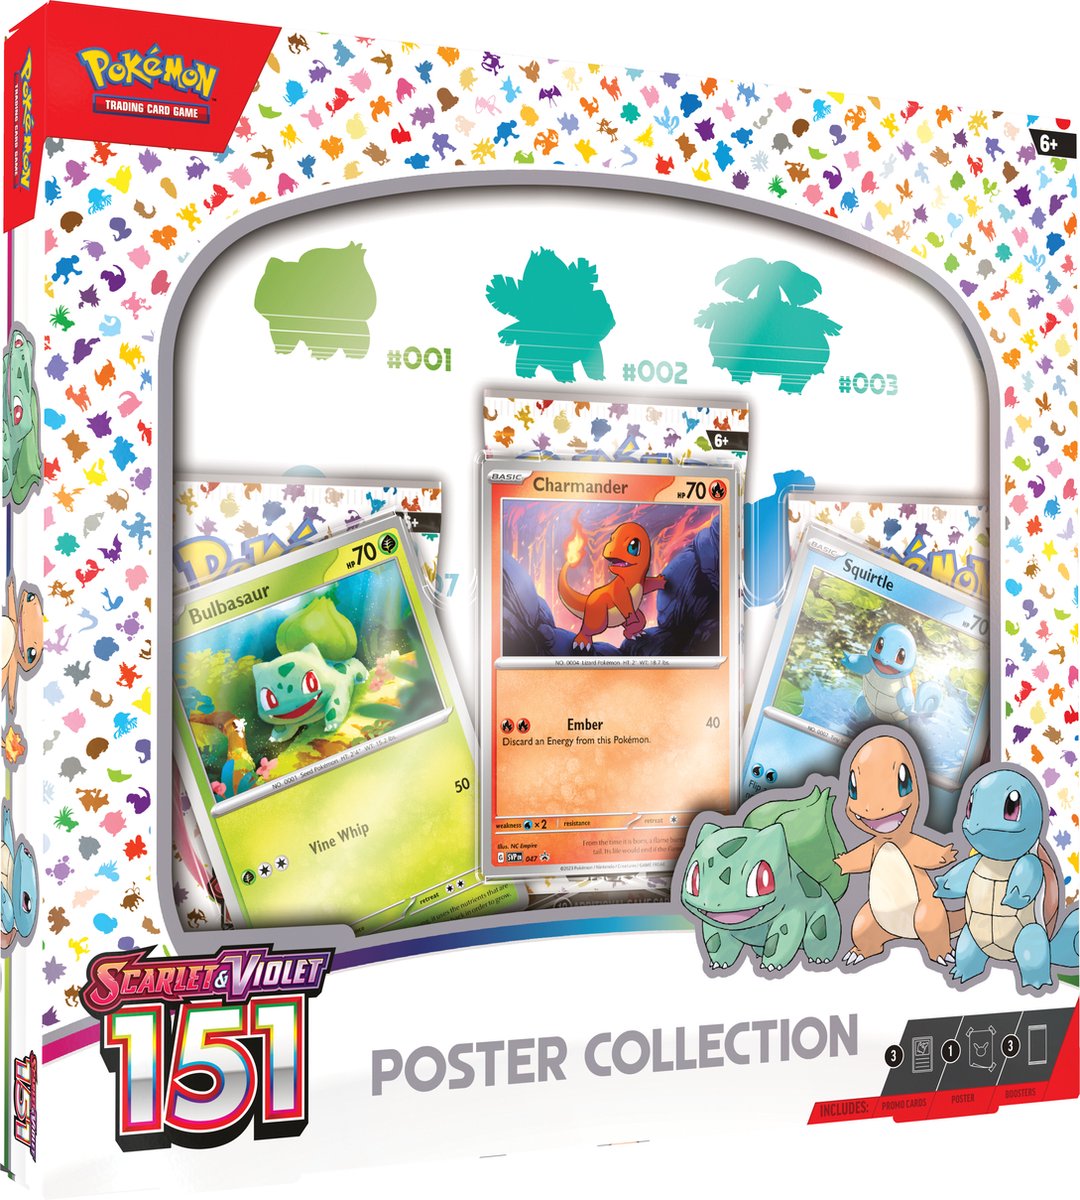 Pokemon TCG: Scarlet and Violet Poster Box - 151 Collection | Pokemon Company